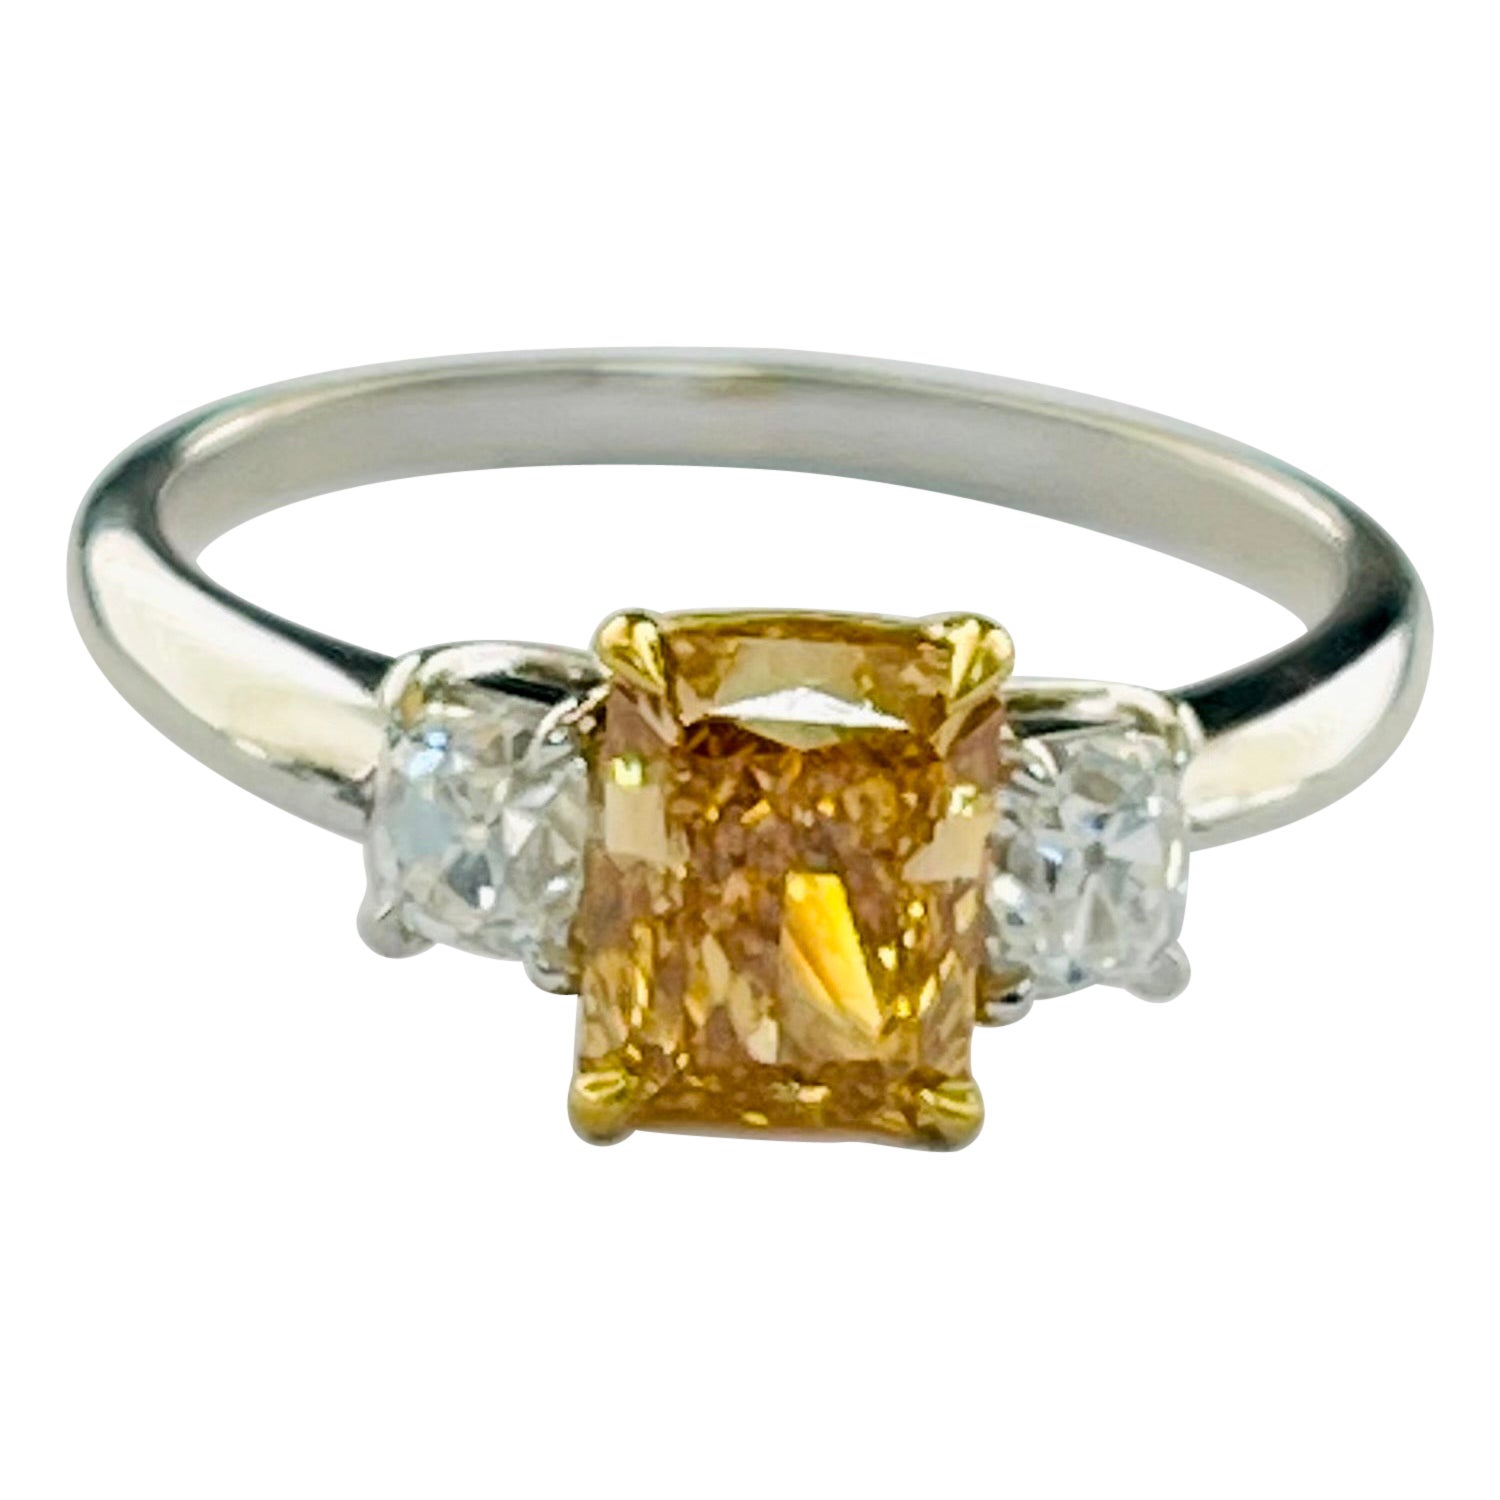 Fancy Intense Yellowish Orange Engagement Ring In 22K Yellow Gold And Platinum.  For Sale